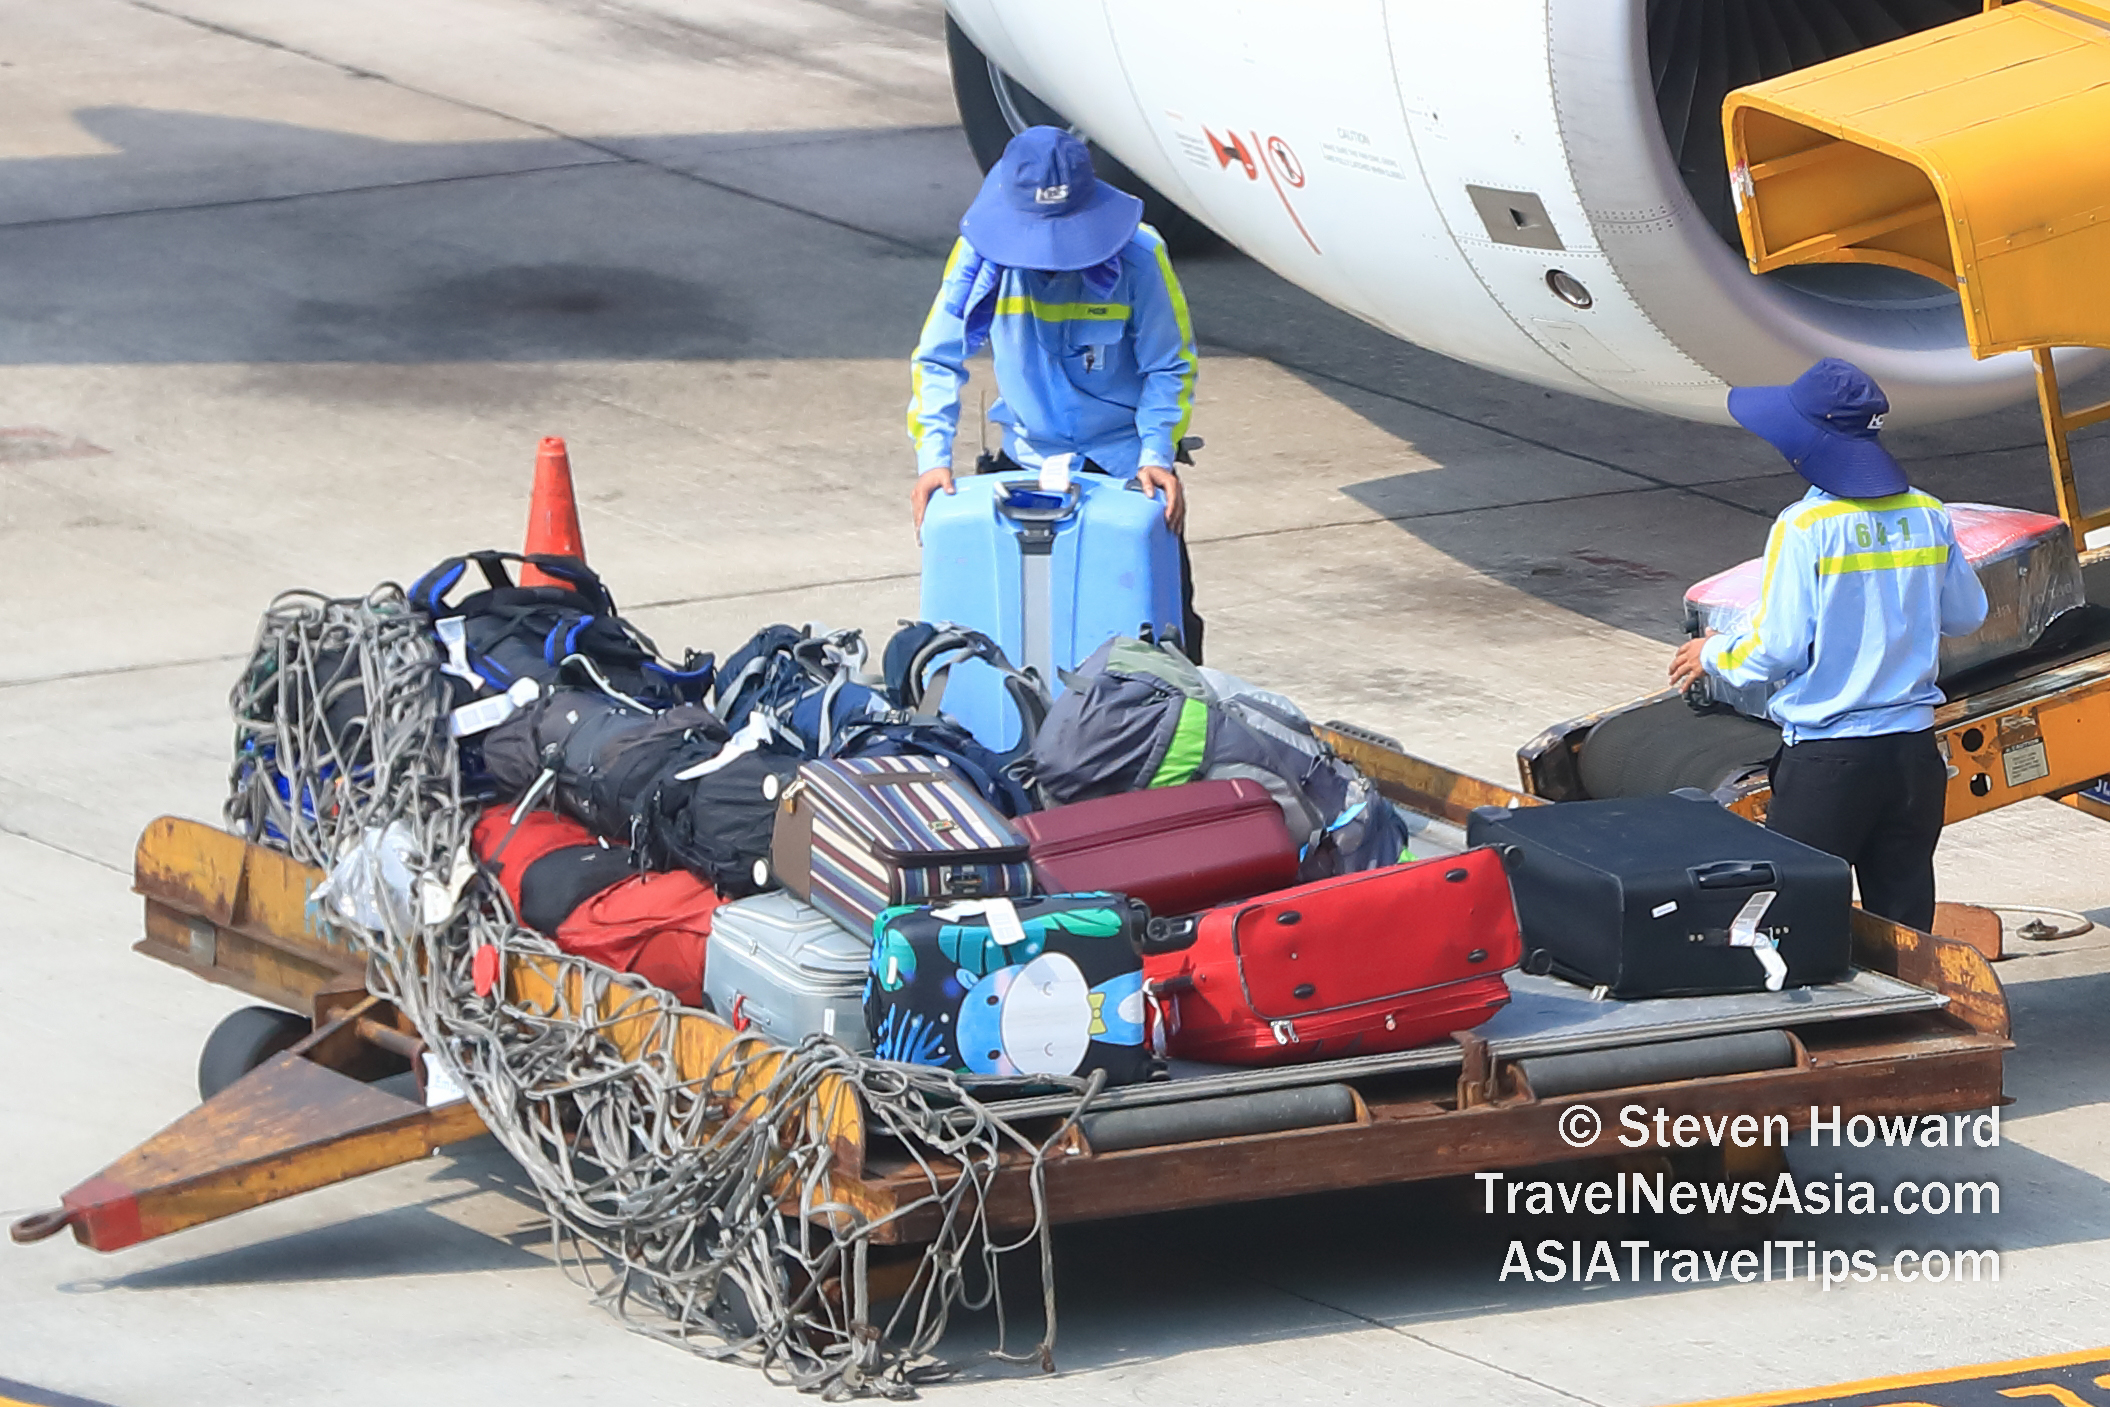 Baggage haandlers loading a plane. Picture by Steven Howard of TravelNewsAsia.com Click to enlarge.